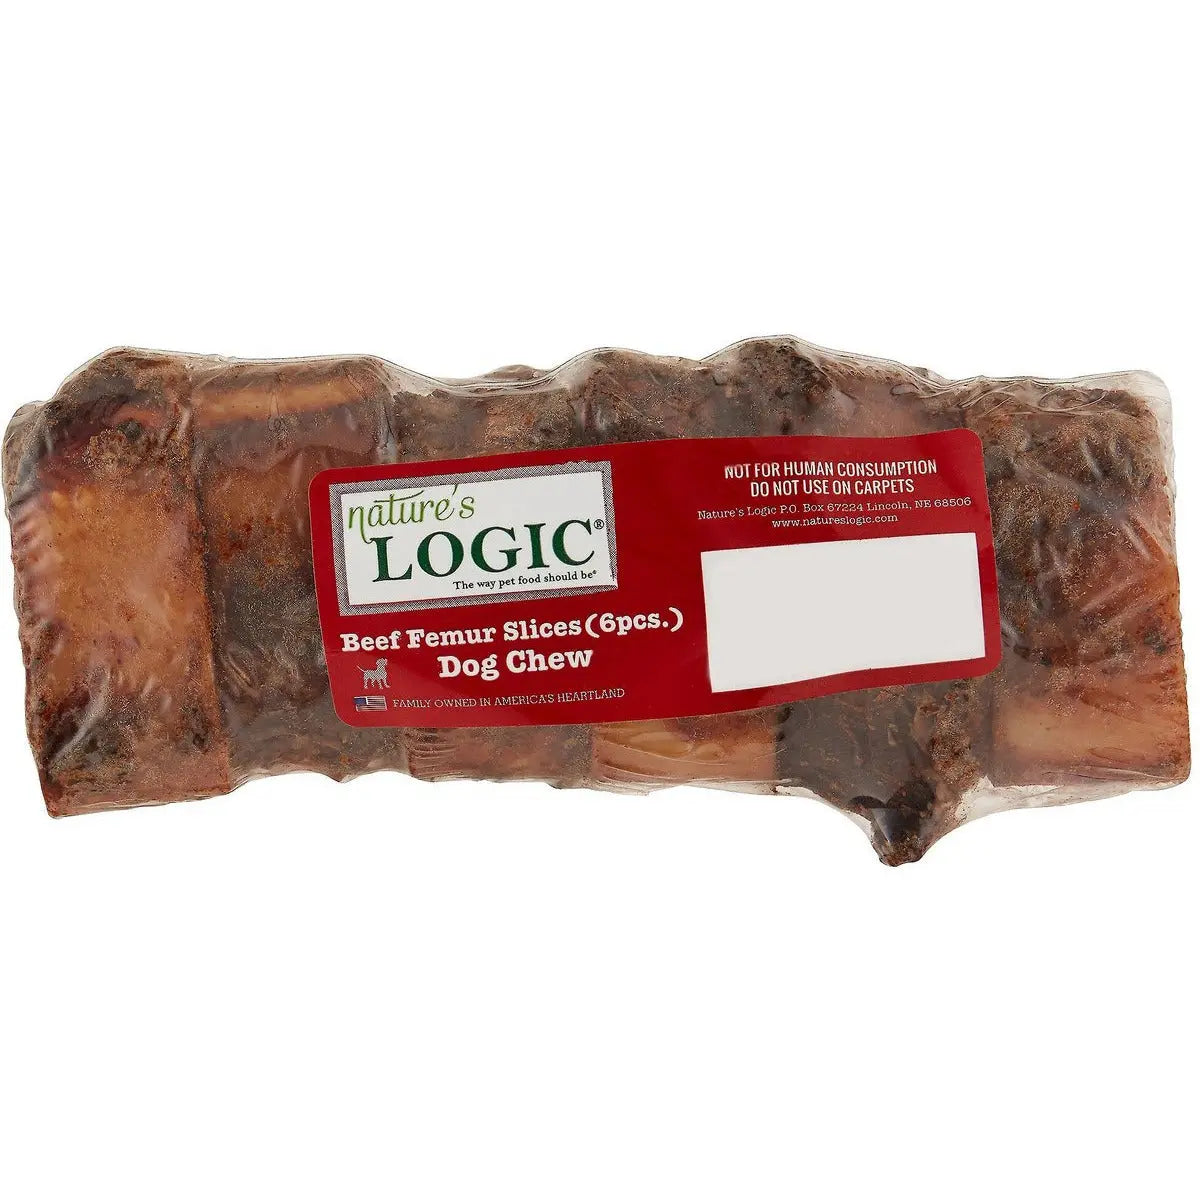 Natures Logic Beef Femur Slices Canine Chew Dog Treats,6 count pack Nature's Logic